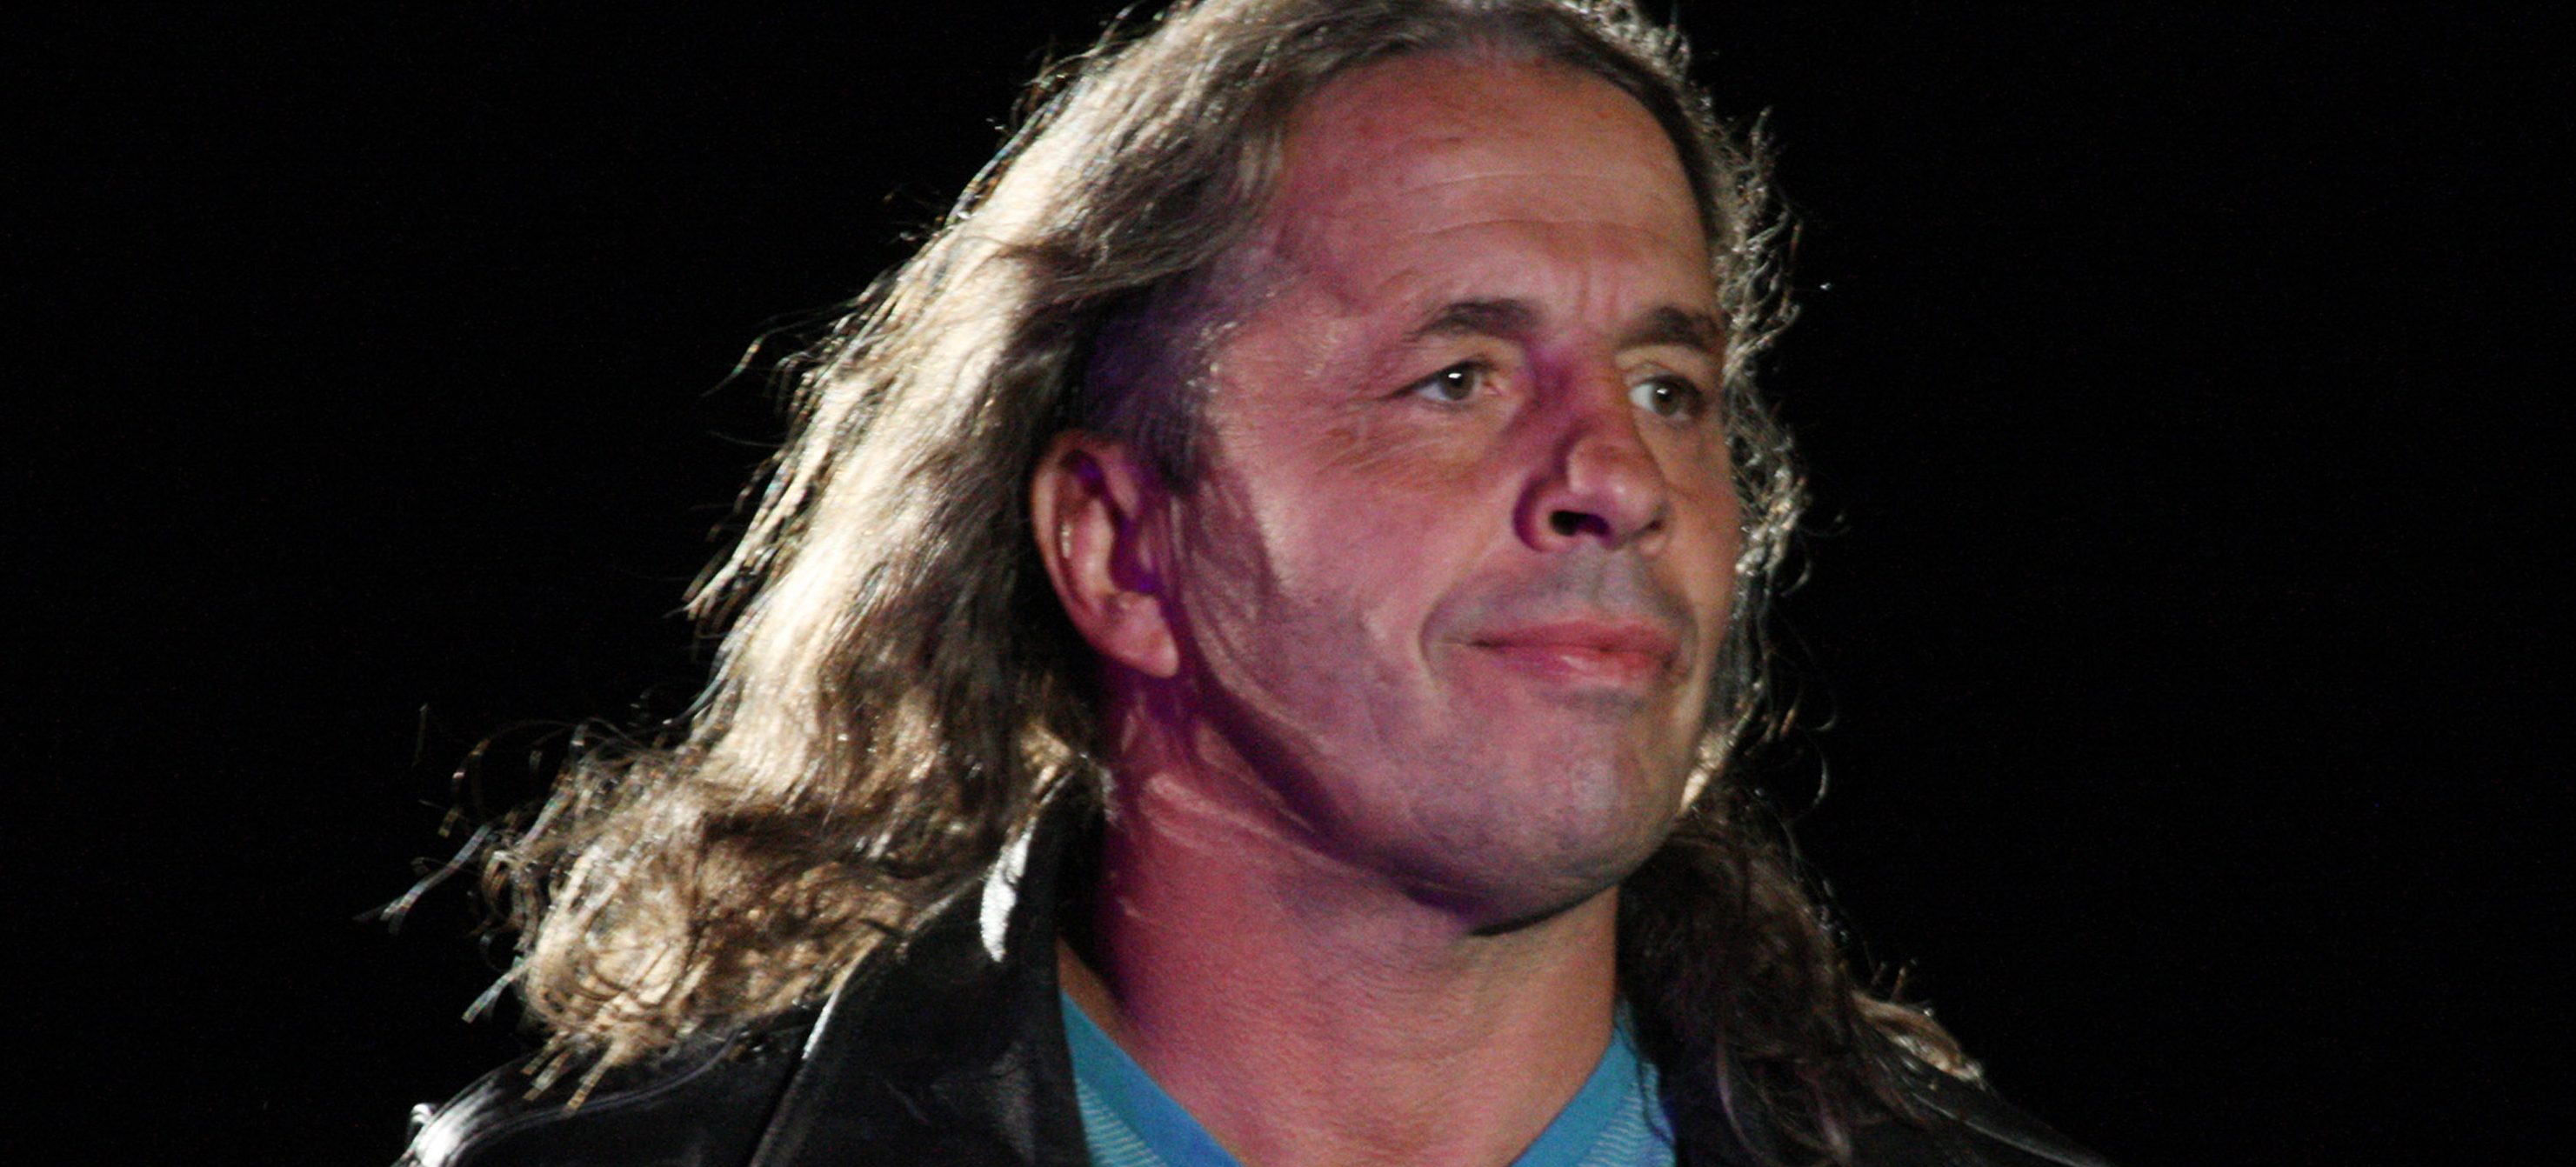 Bret "The Hitman" Hart during 2011 WWE Smackdown Live Tour in Durban, South Africa.  (Photo by Steve Haag/Gallo Images/Getty Images)